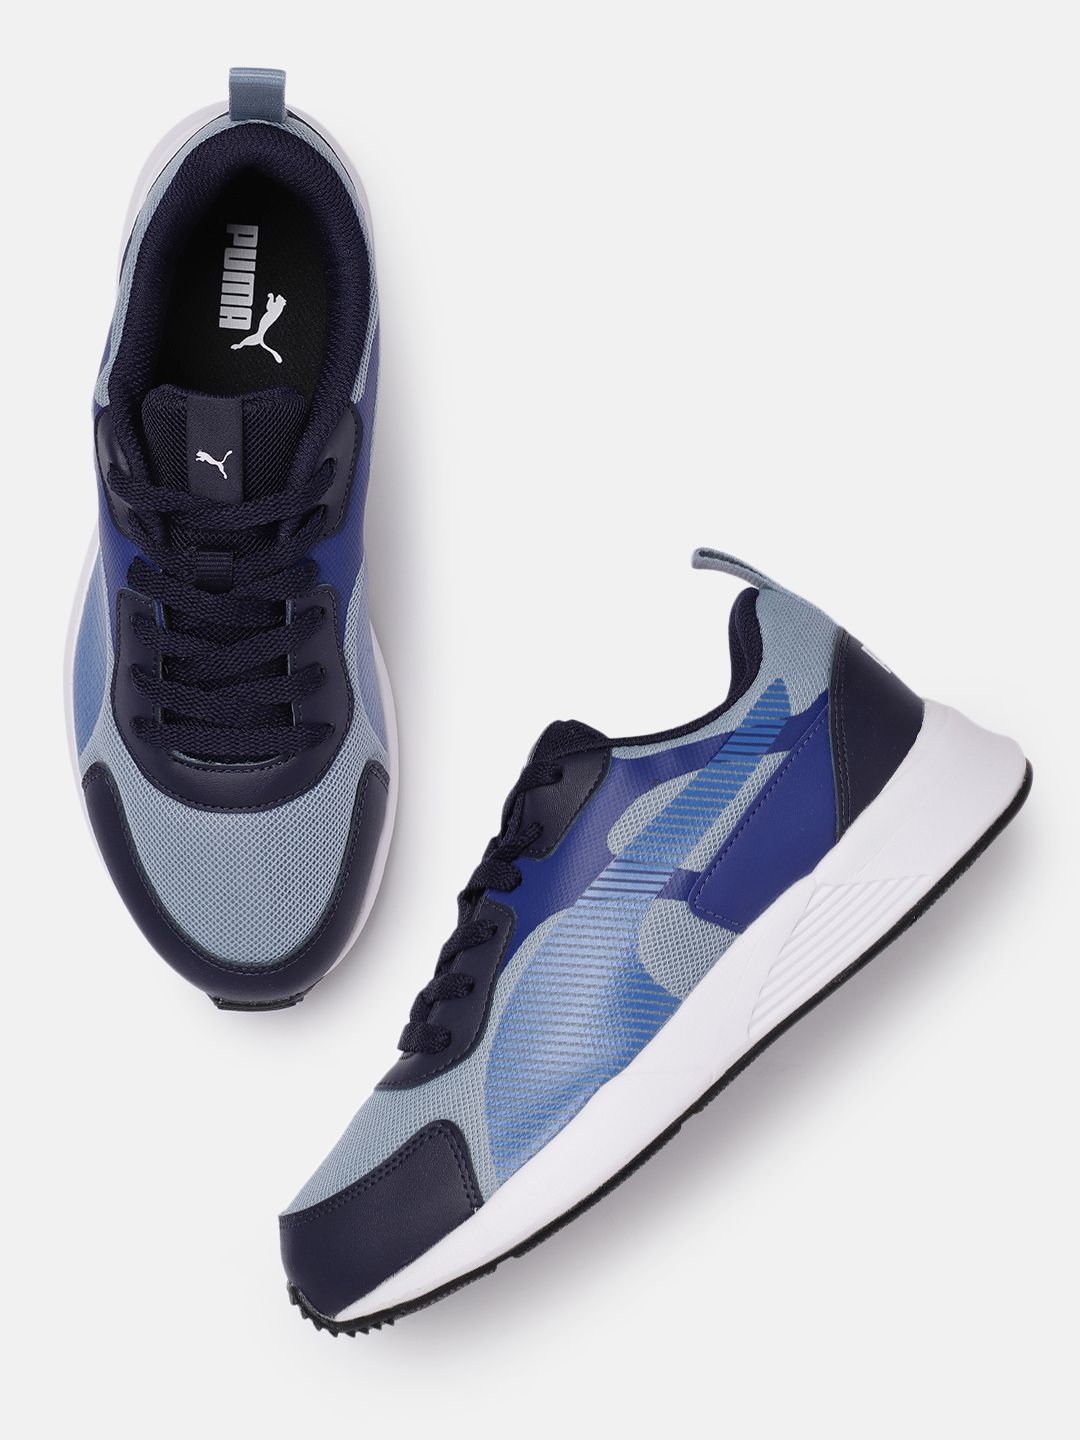 Puma Men Navy Blue and Off-White Colourblocked Sneakers - Price History